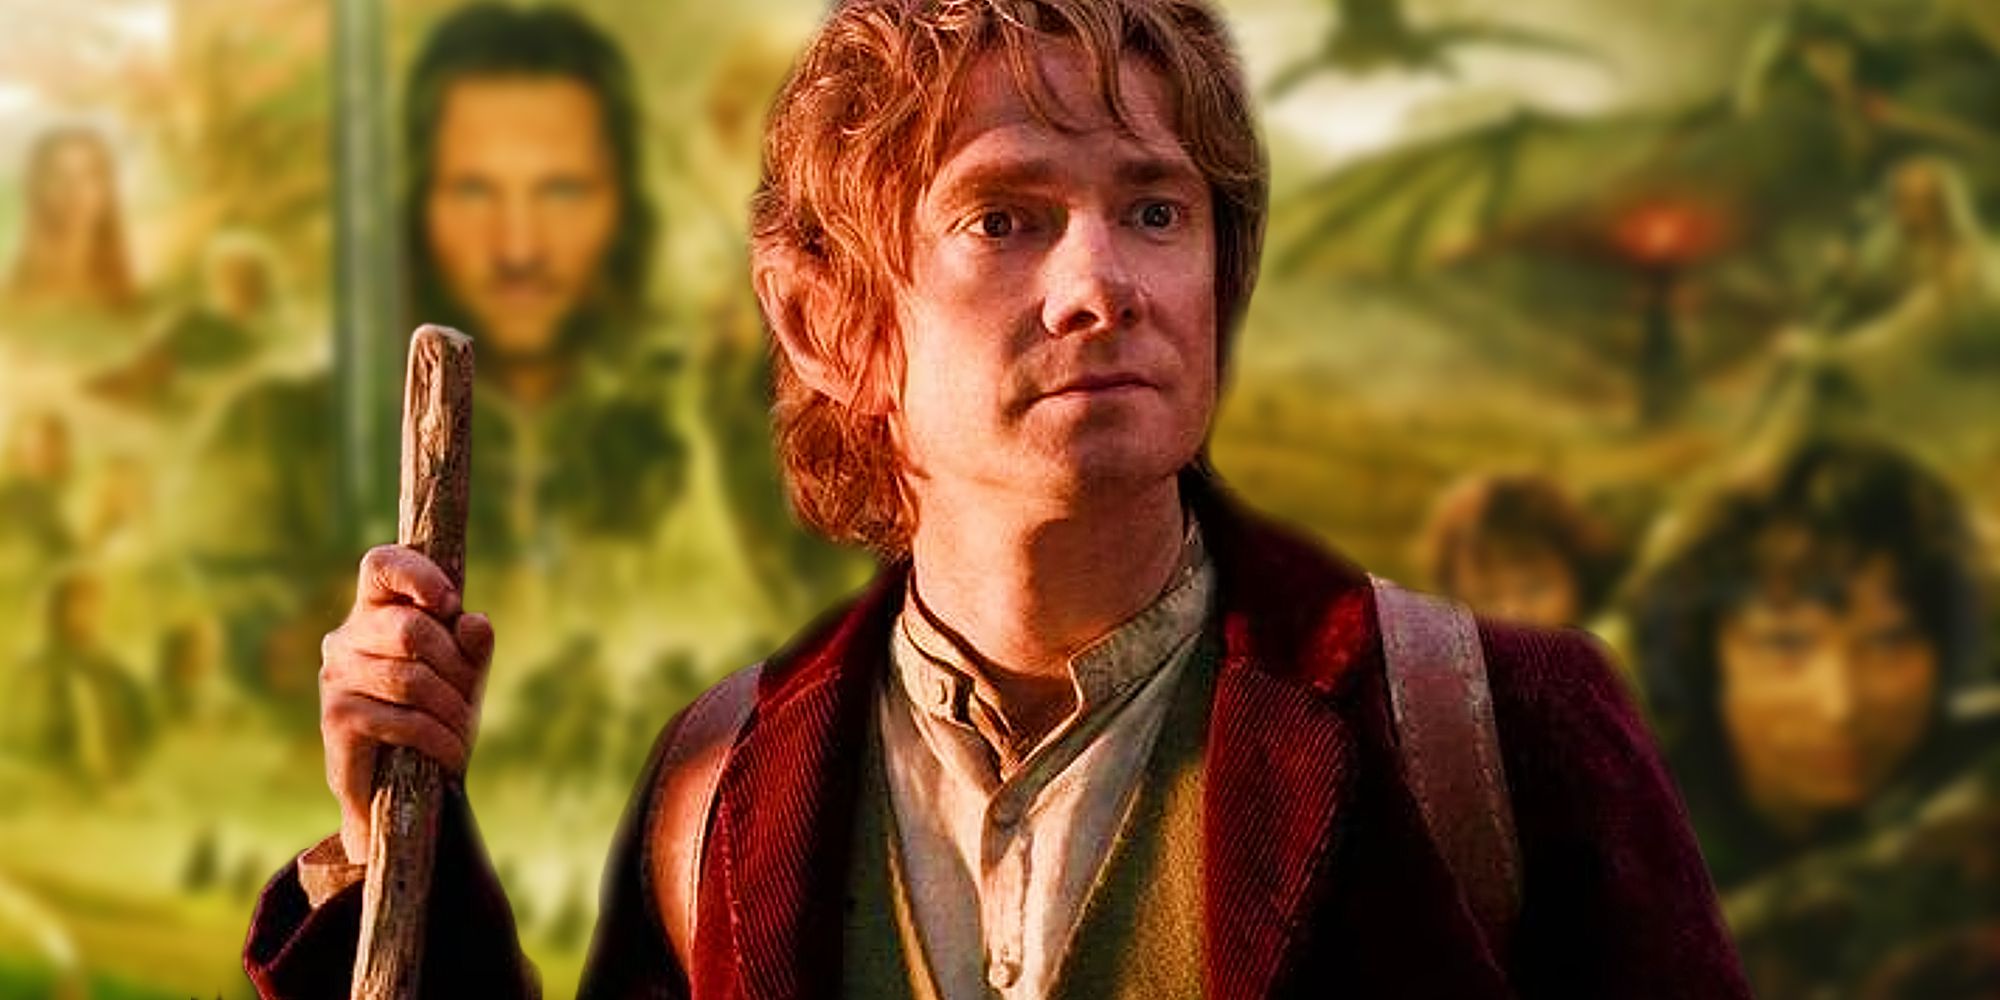 Bilbo Baggins from The Hobbit trilogy above a blurred poster for Lord of the Rings